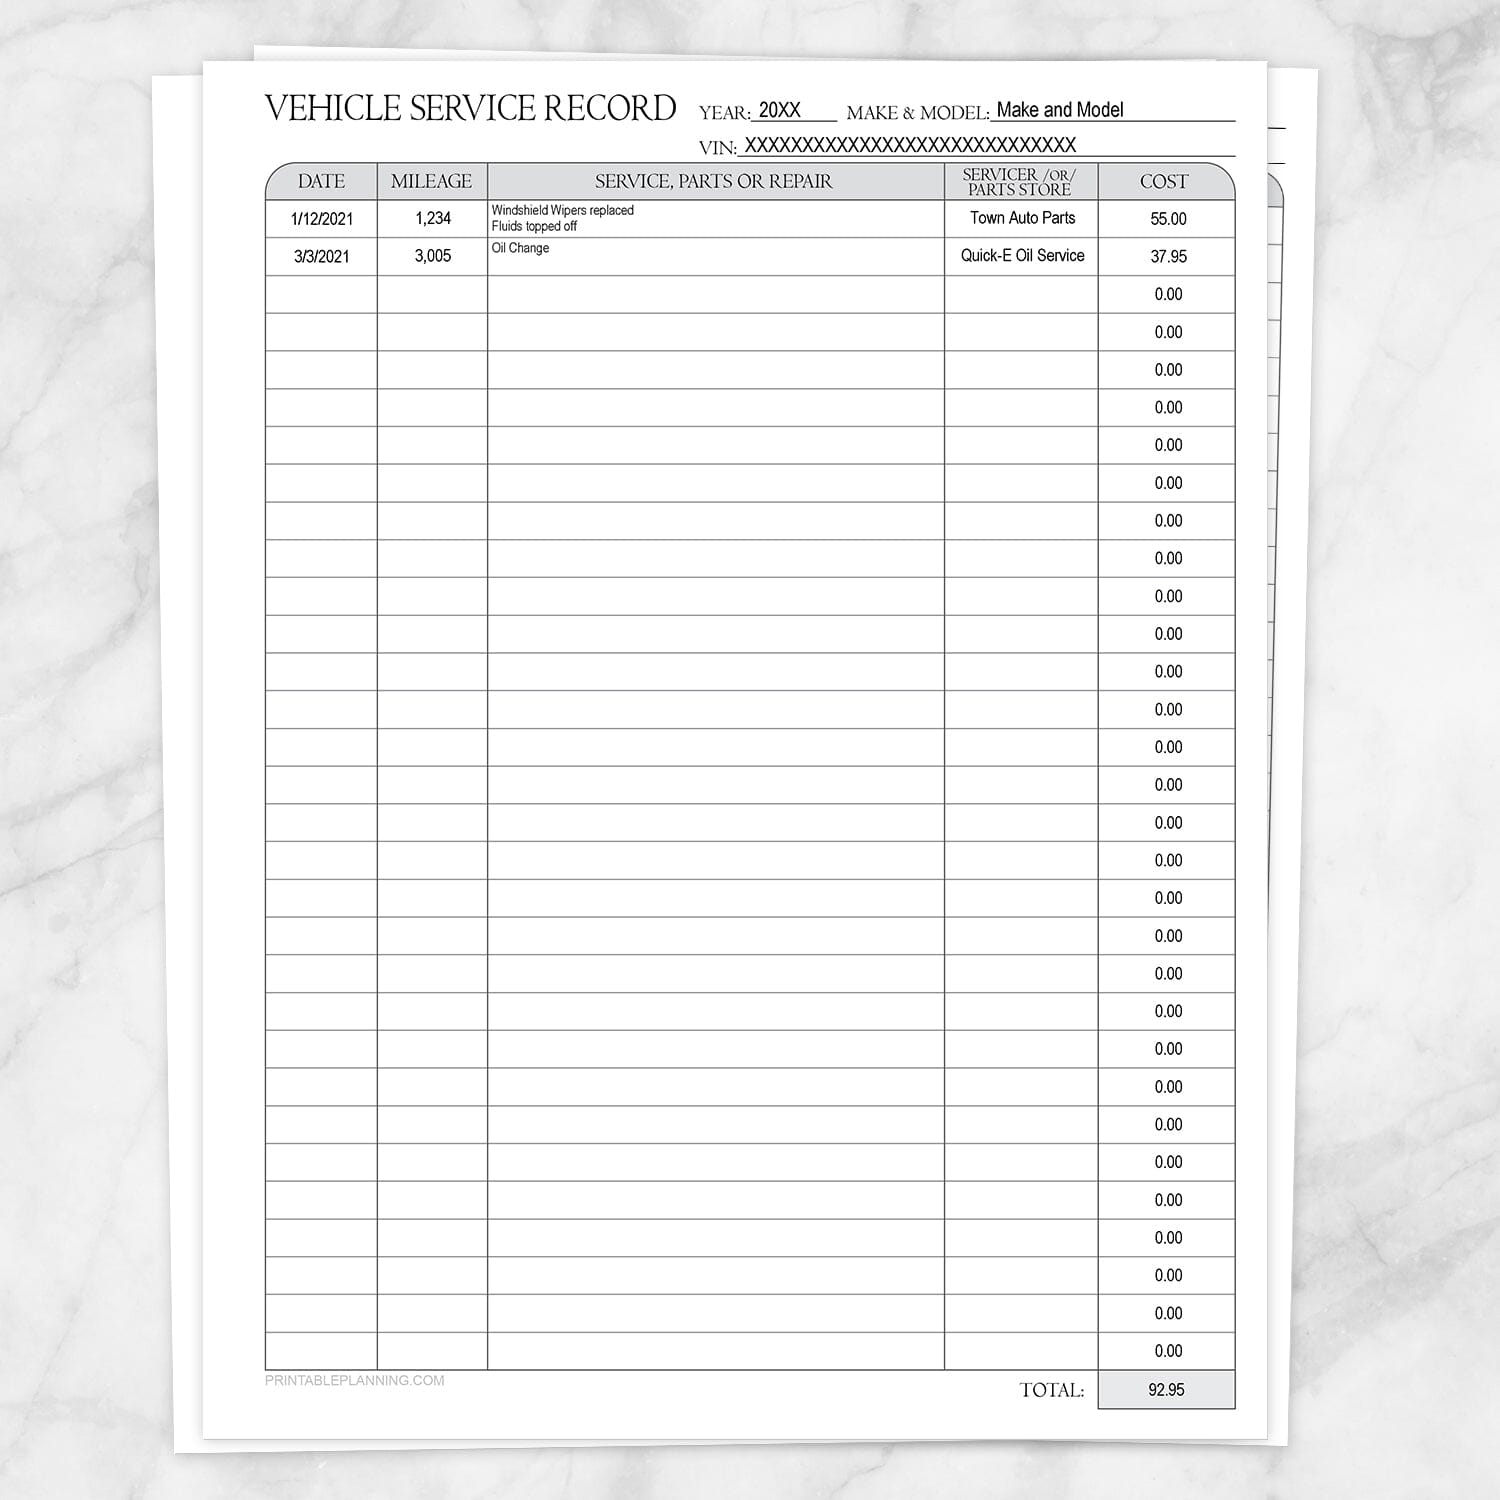 Printable Vehicle Service Record with Auto-Calculating Total at Printable Planning